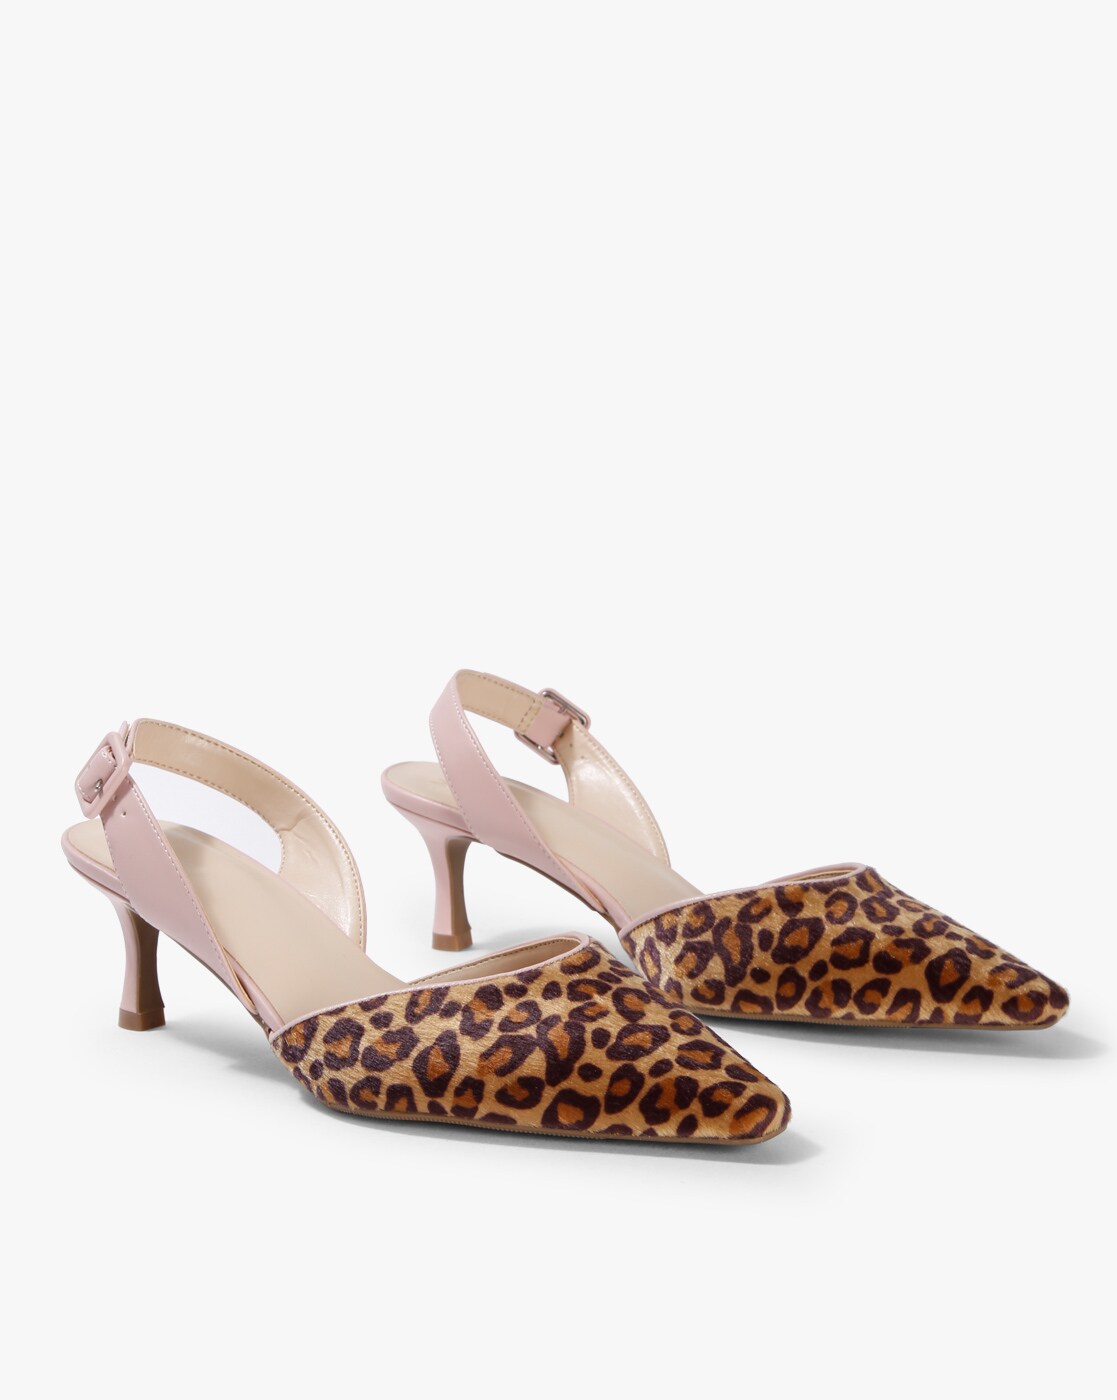 Dune Leopard Print Pointed Heeled Shoes in Brown | Lyst